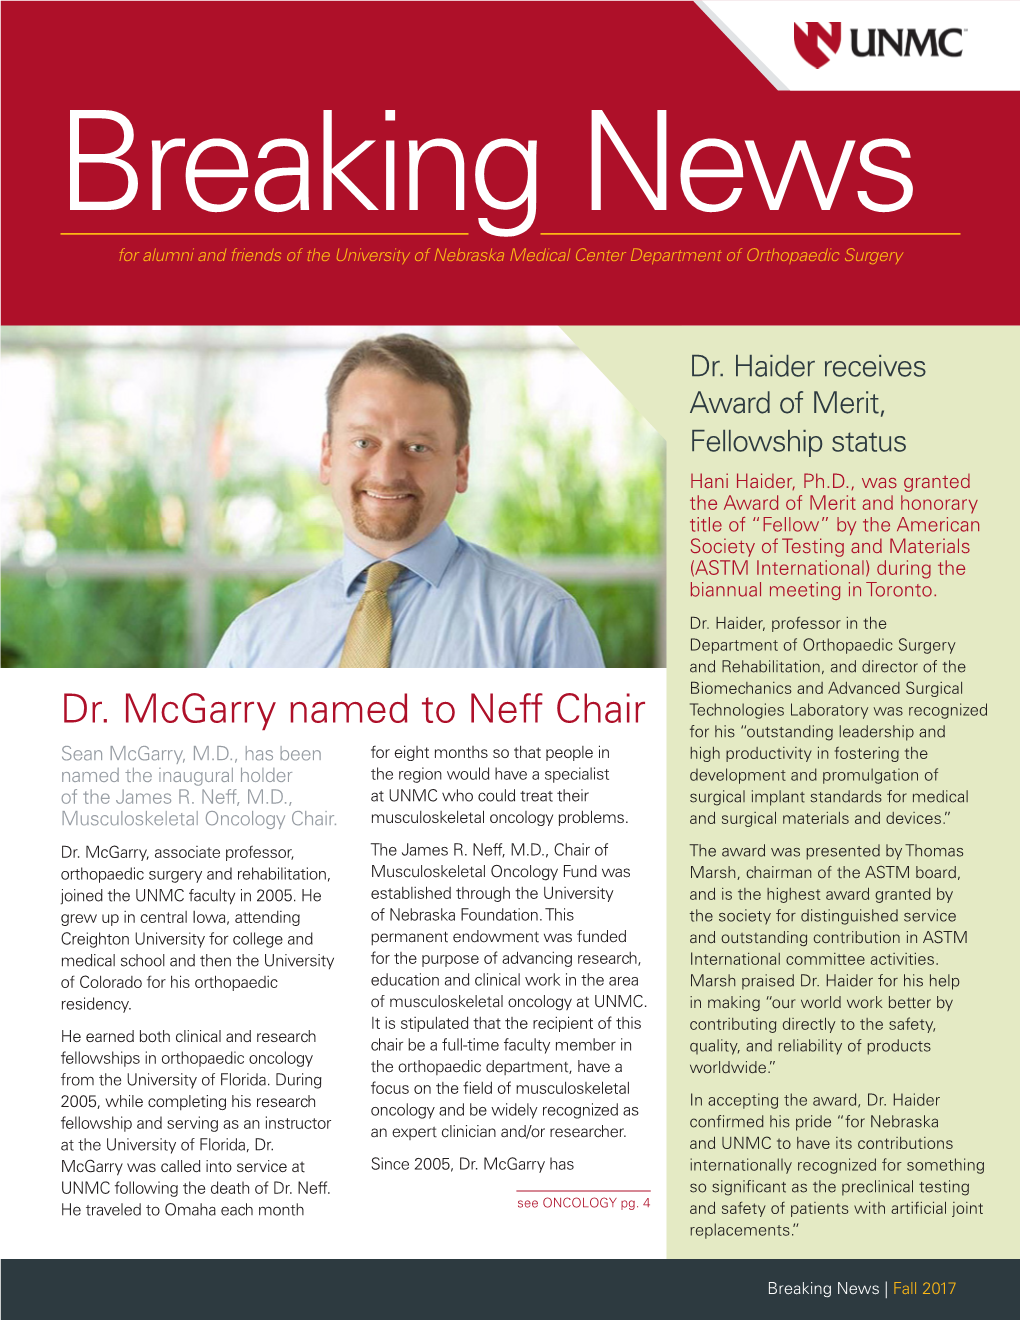 Dr. Mcgarry Named to Neff Chair